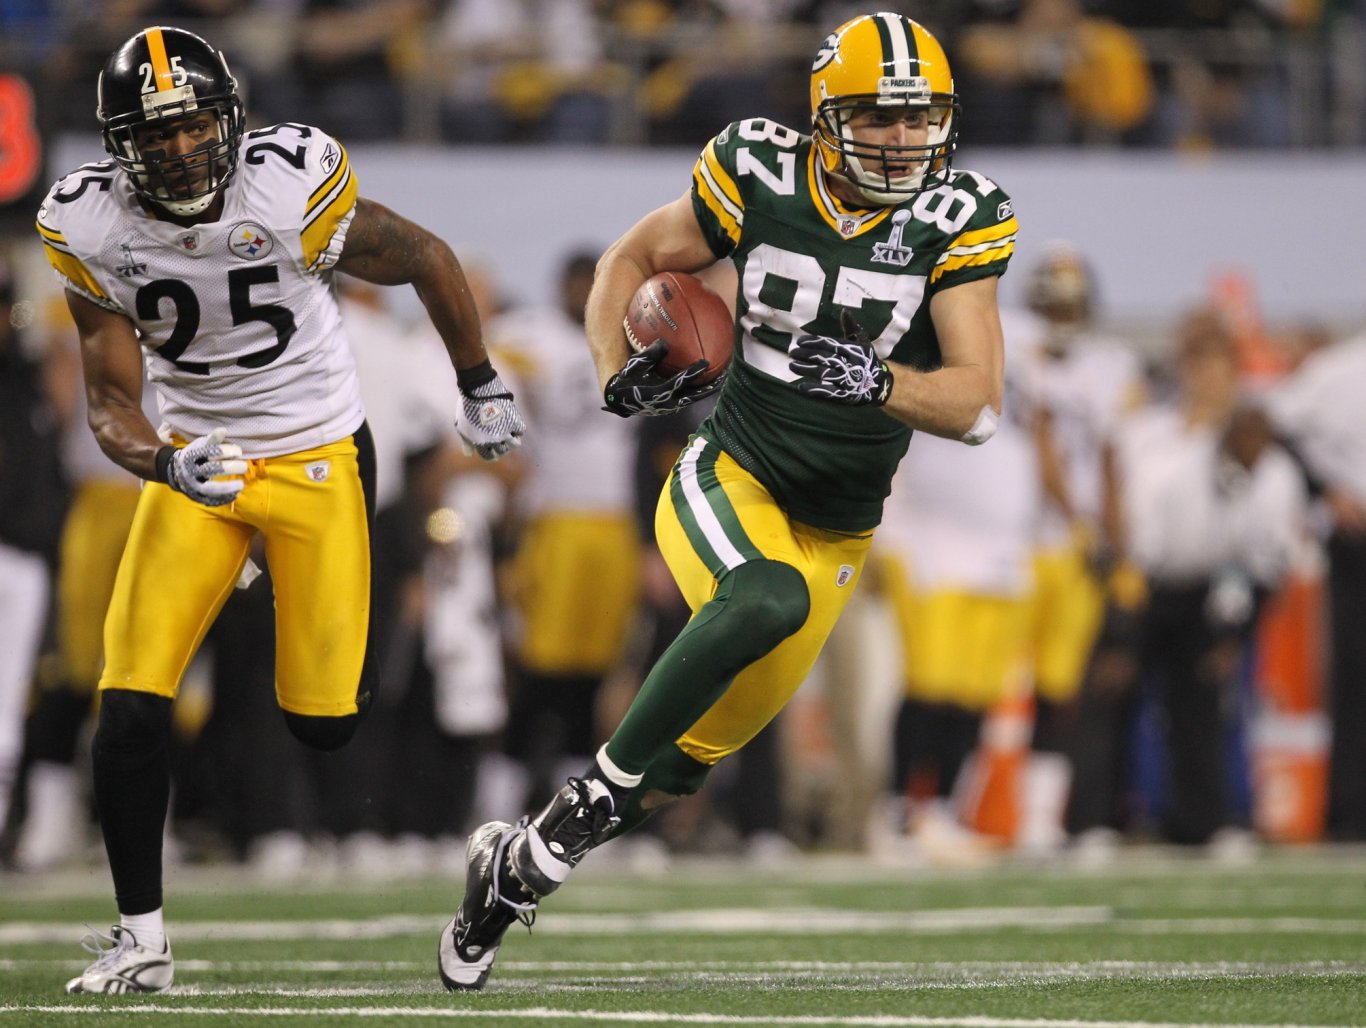 Does Jordy Nelson Deserve to Be in the Pro Football Hall of Fame?